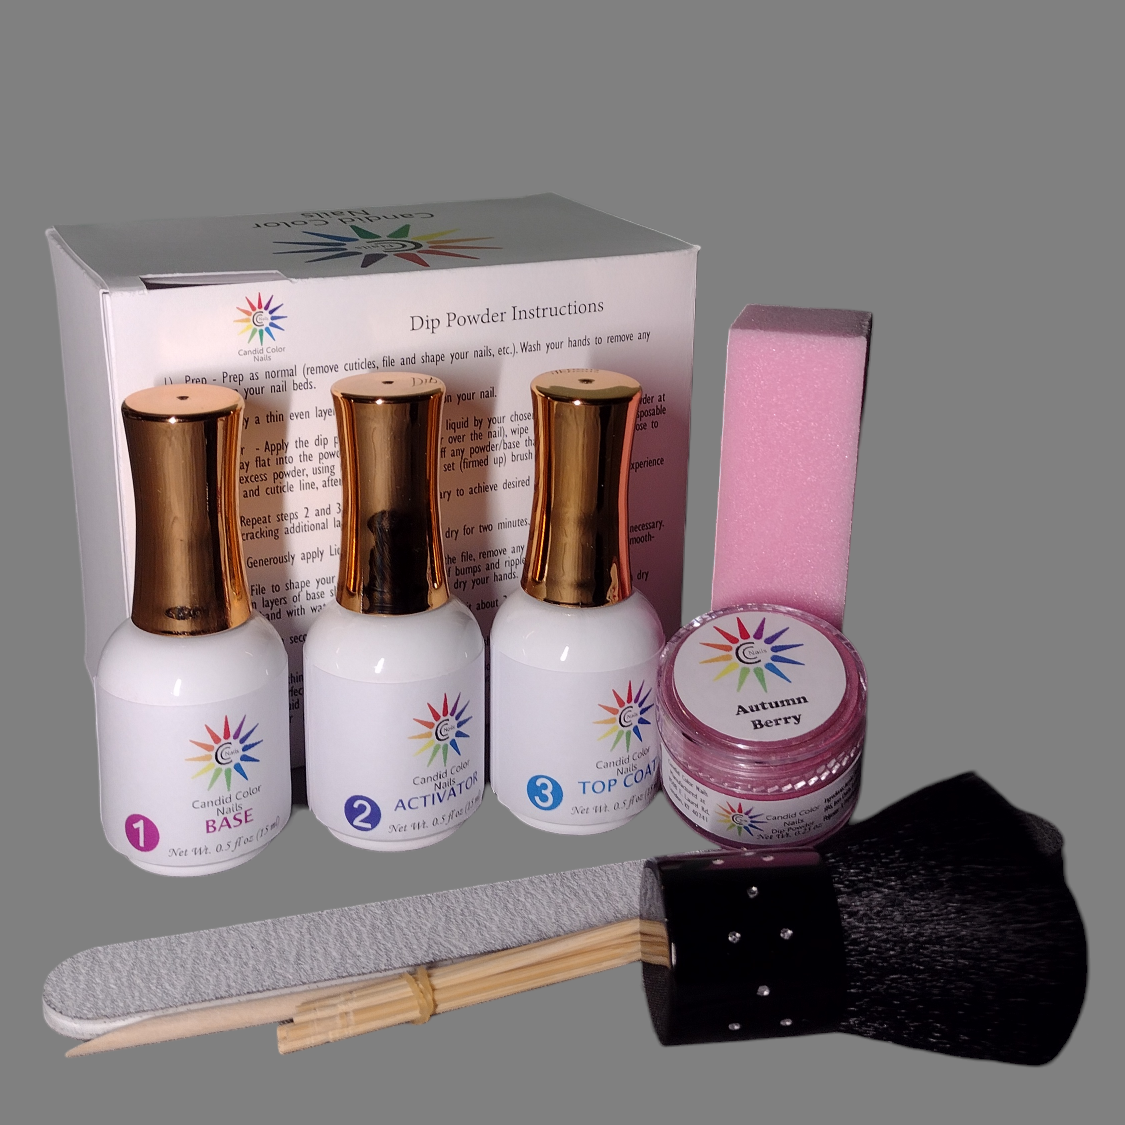 Candid Color Nails Complete Starter Kit Box with instruction on the back shown with contents: dip liquids base, activator, and Top Coat, a 0.25 oz dip powder, buffing block, dusting brush, finger nail file, cuticle stick, and 5 tooth picks.